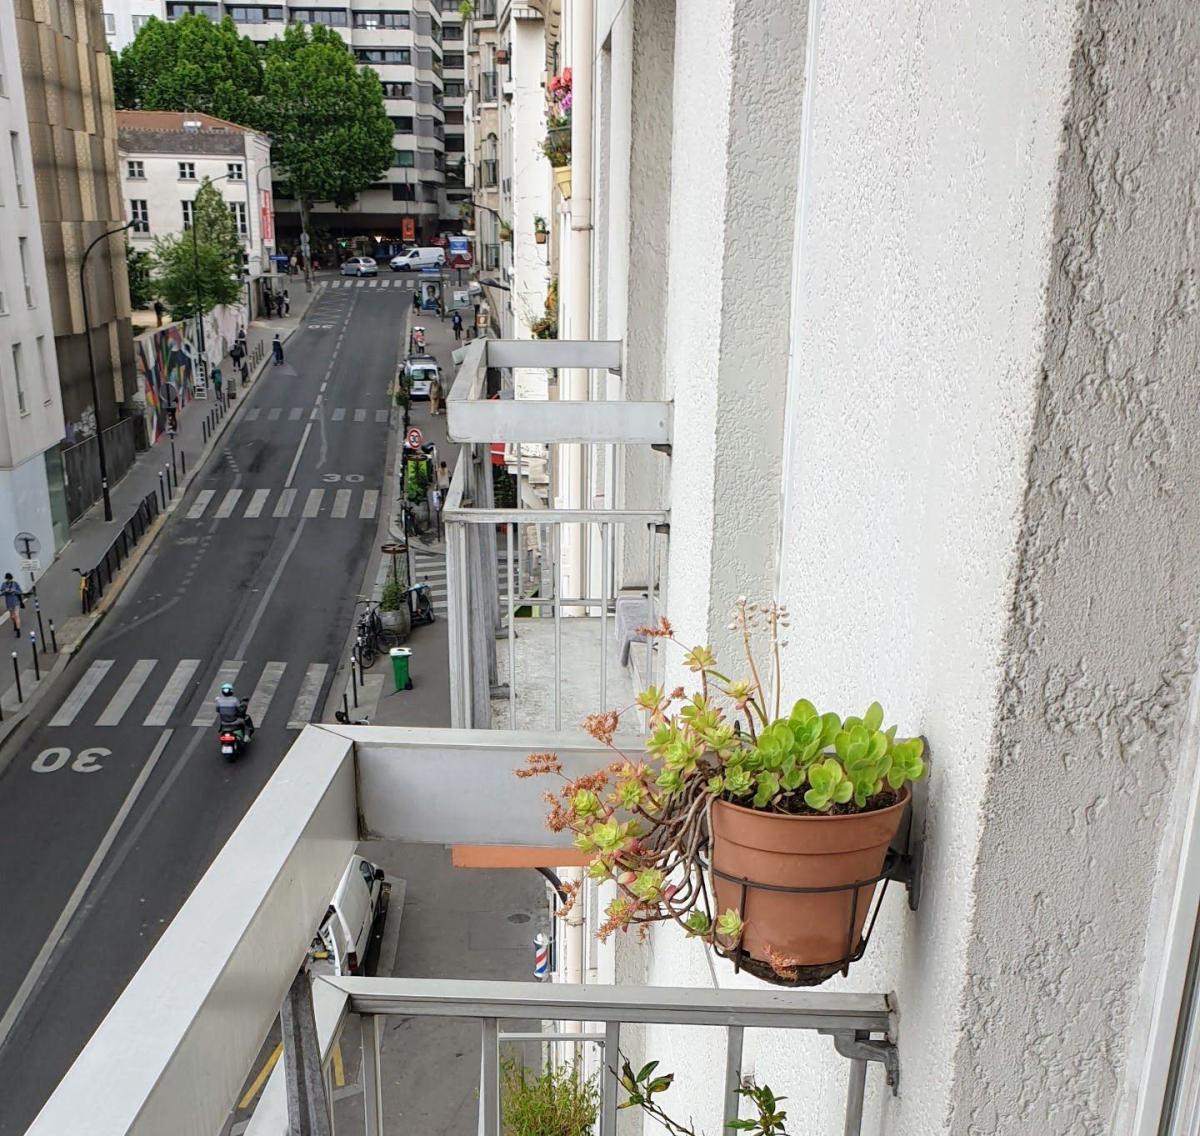 Living 47.3m2 balcony apartment life annuity occupied